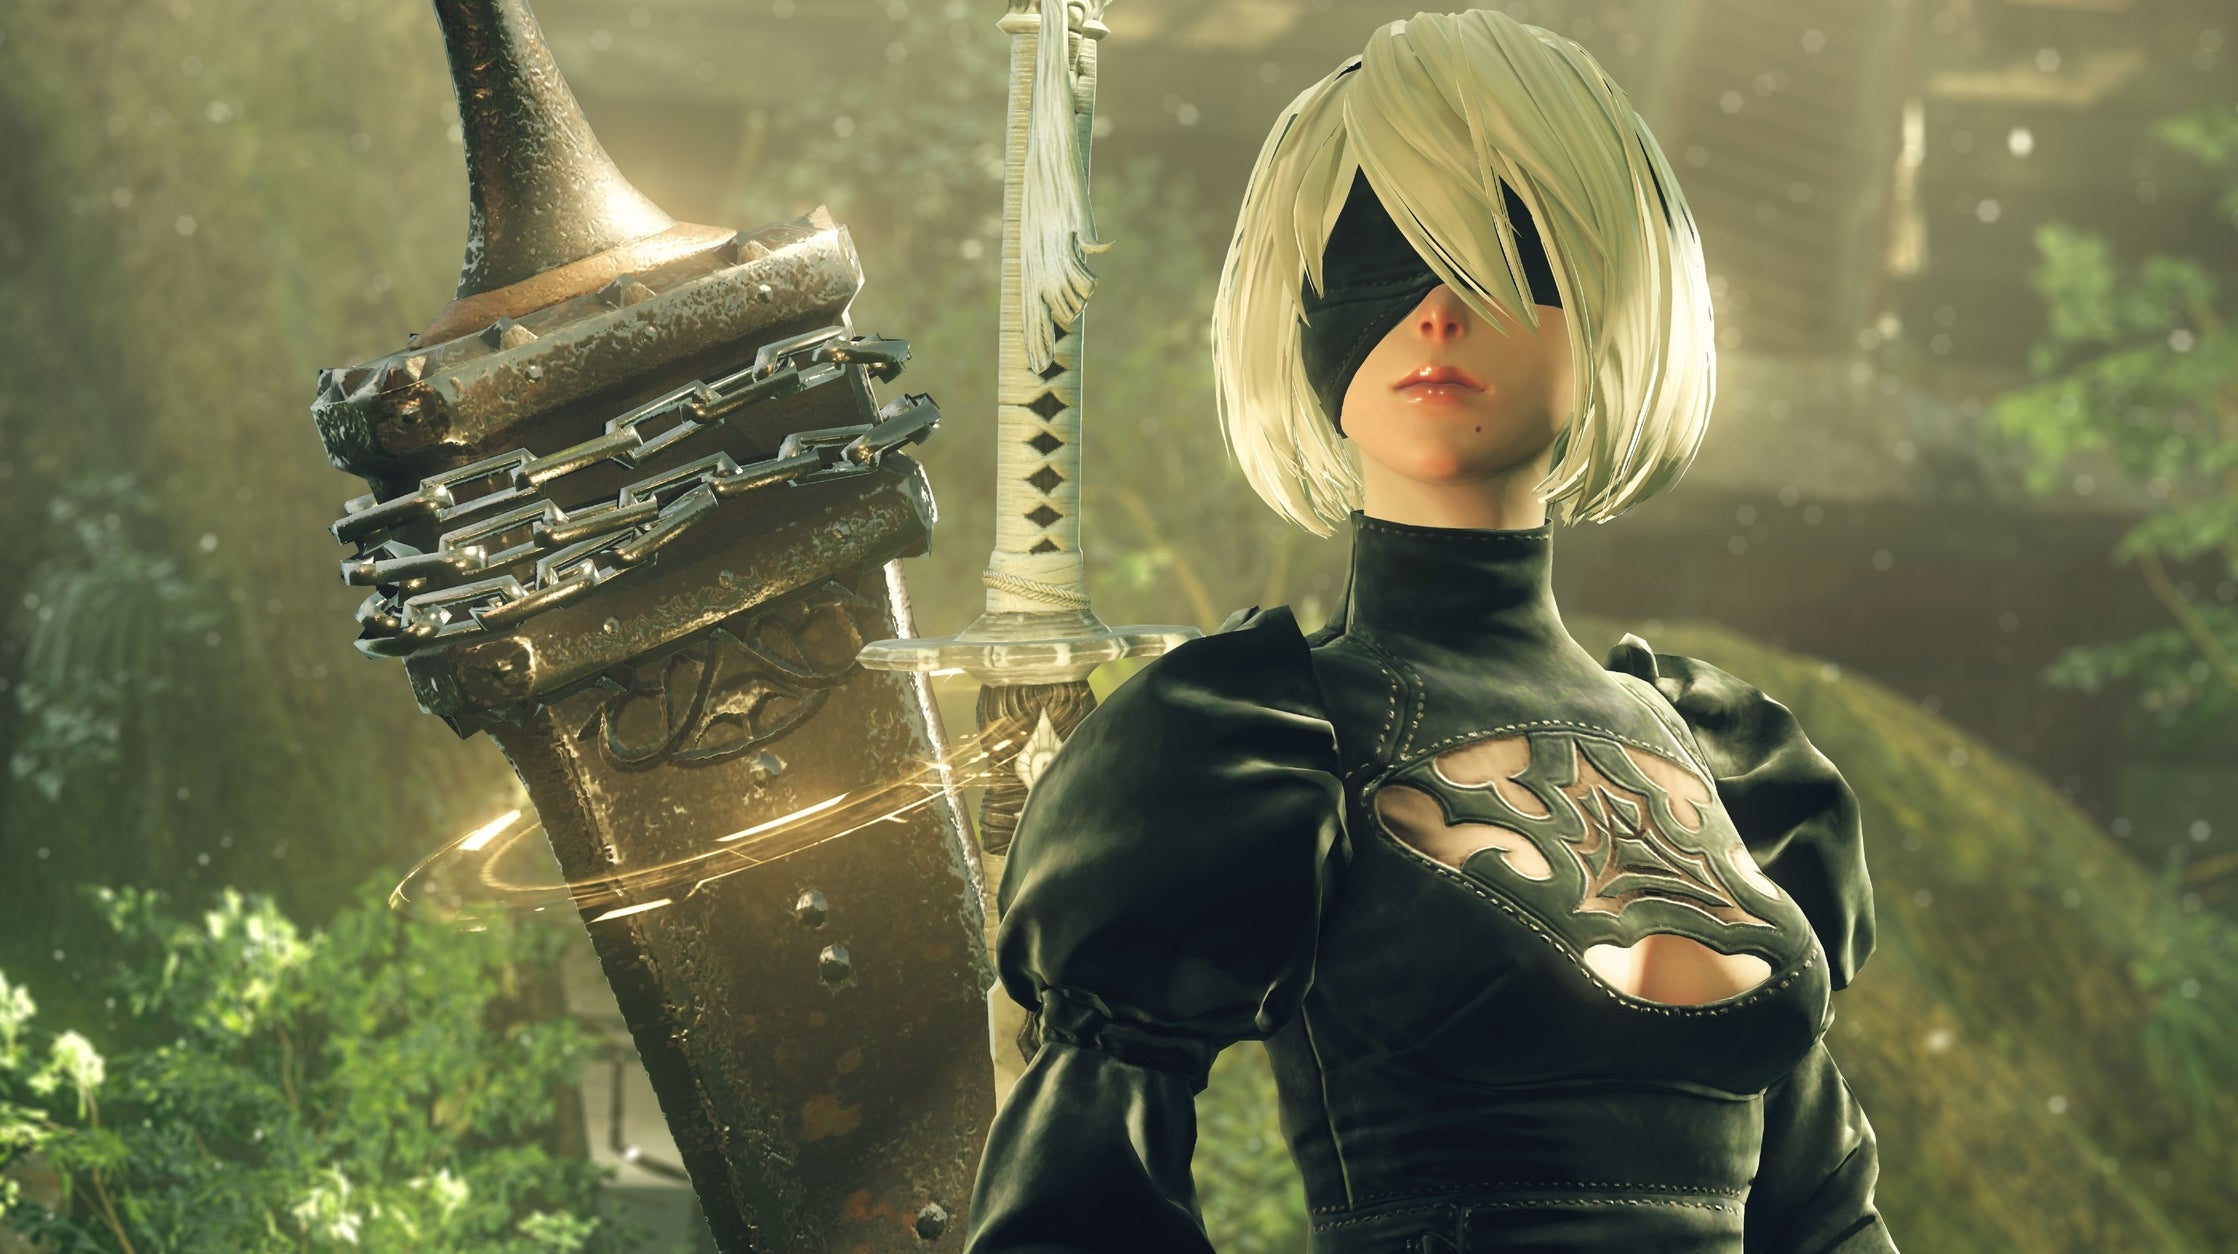 Image for Square Enix officially unveils Nier: Automata's Game of the YoRHa Edition